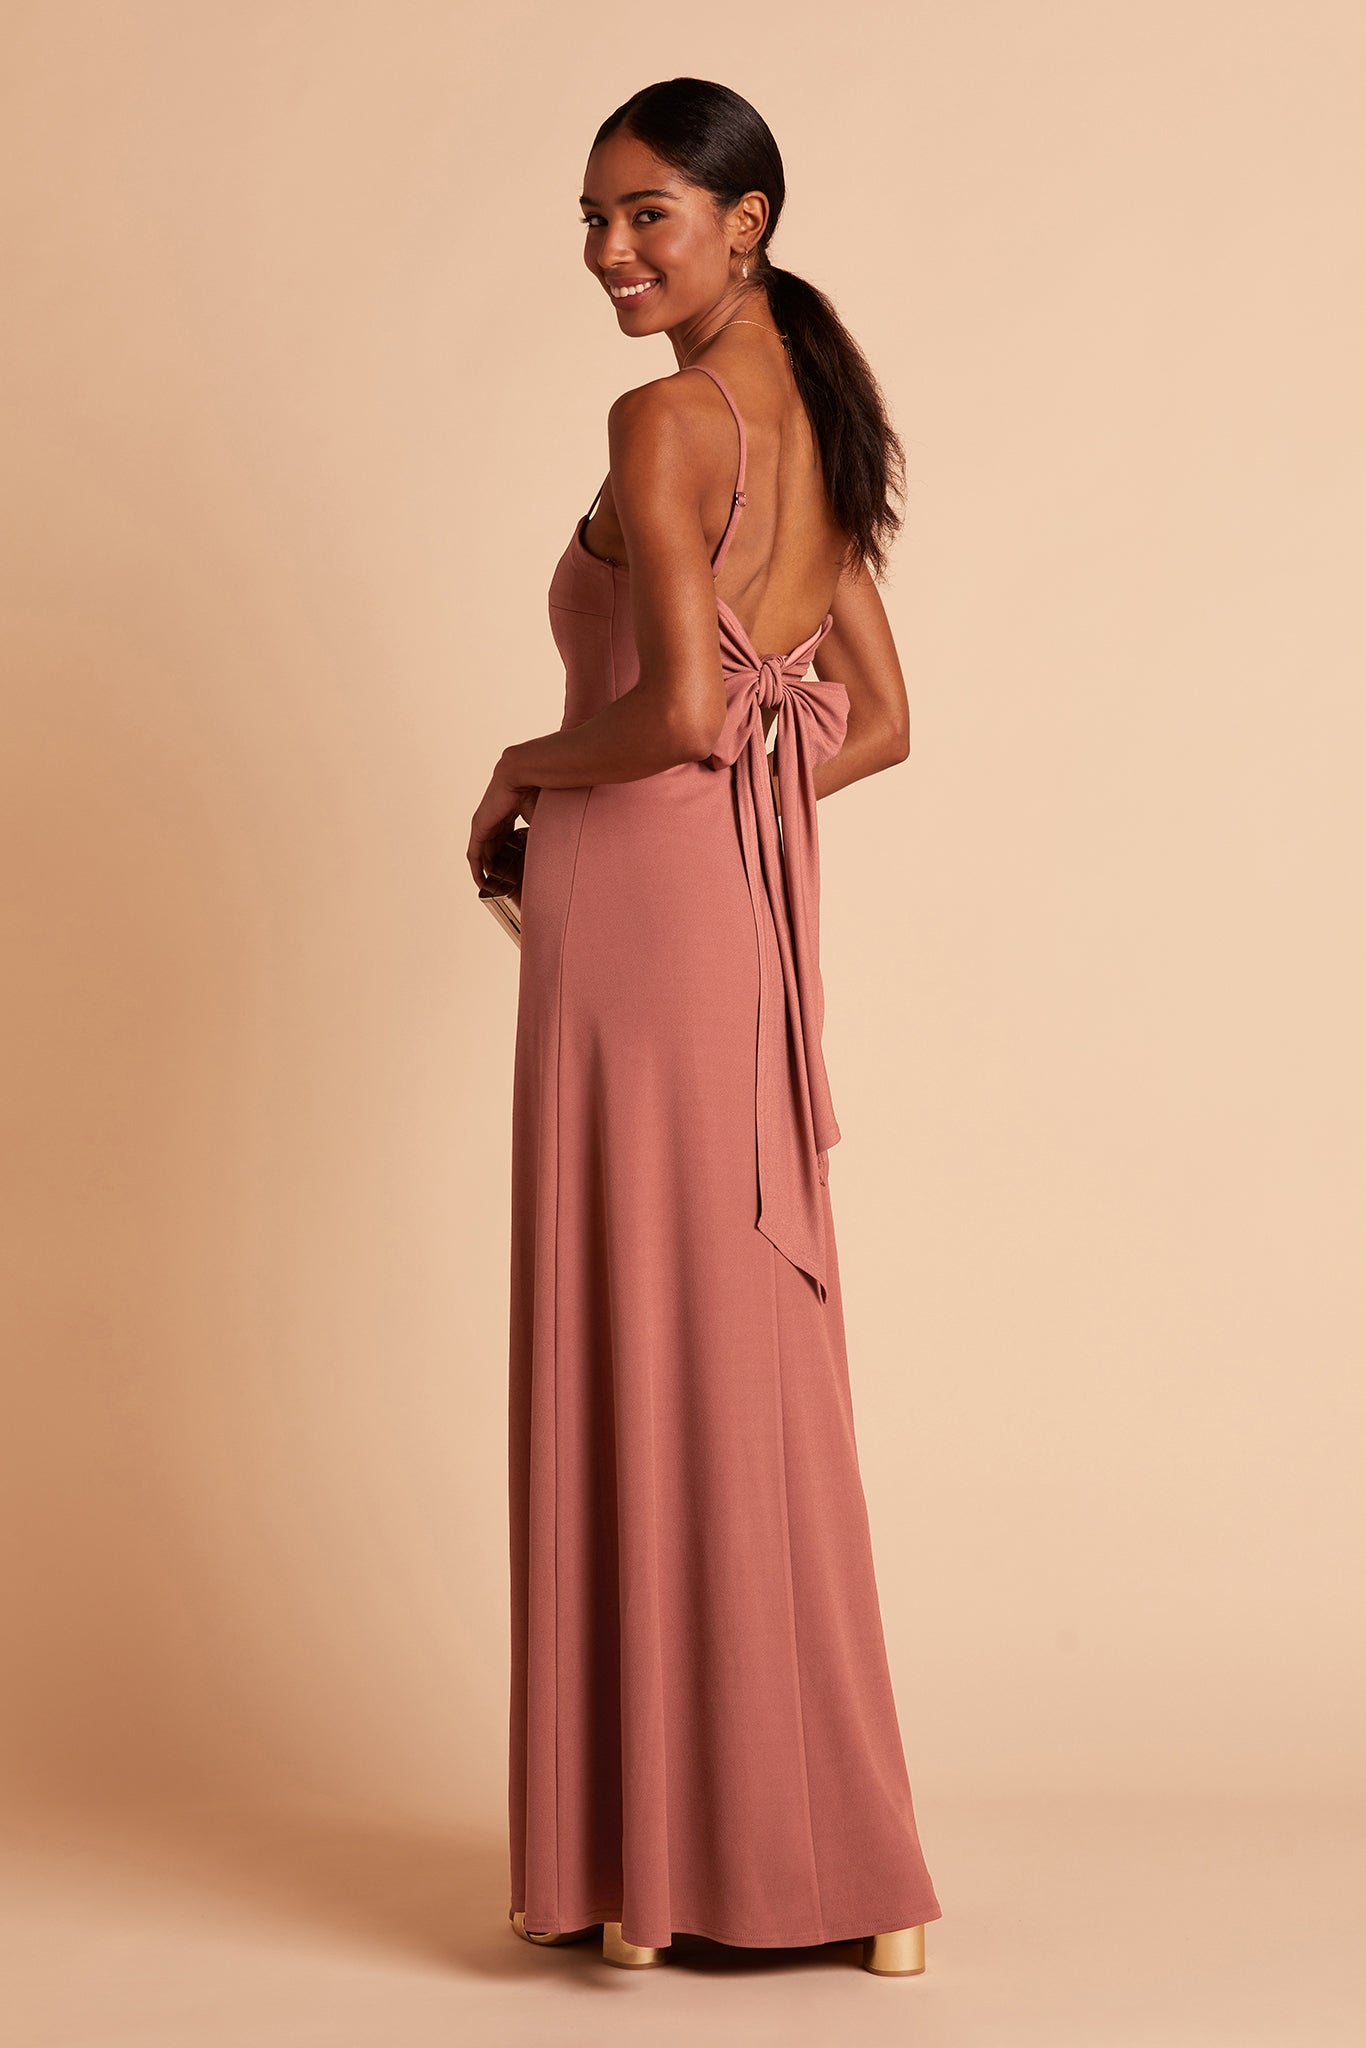 Benny bridesmaid dress in desert rose crepe by Birdy Grey, side view